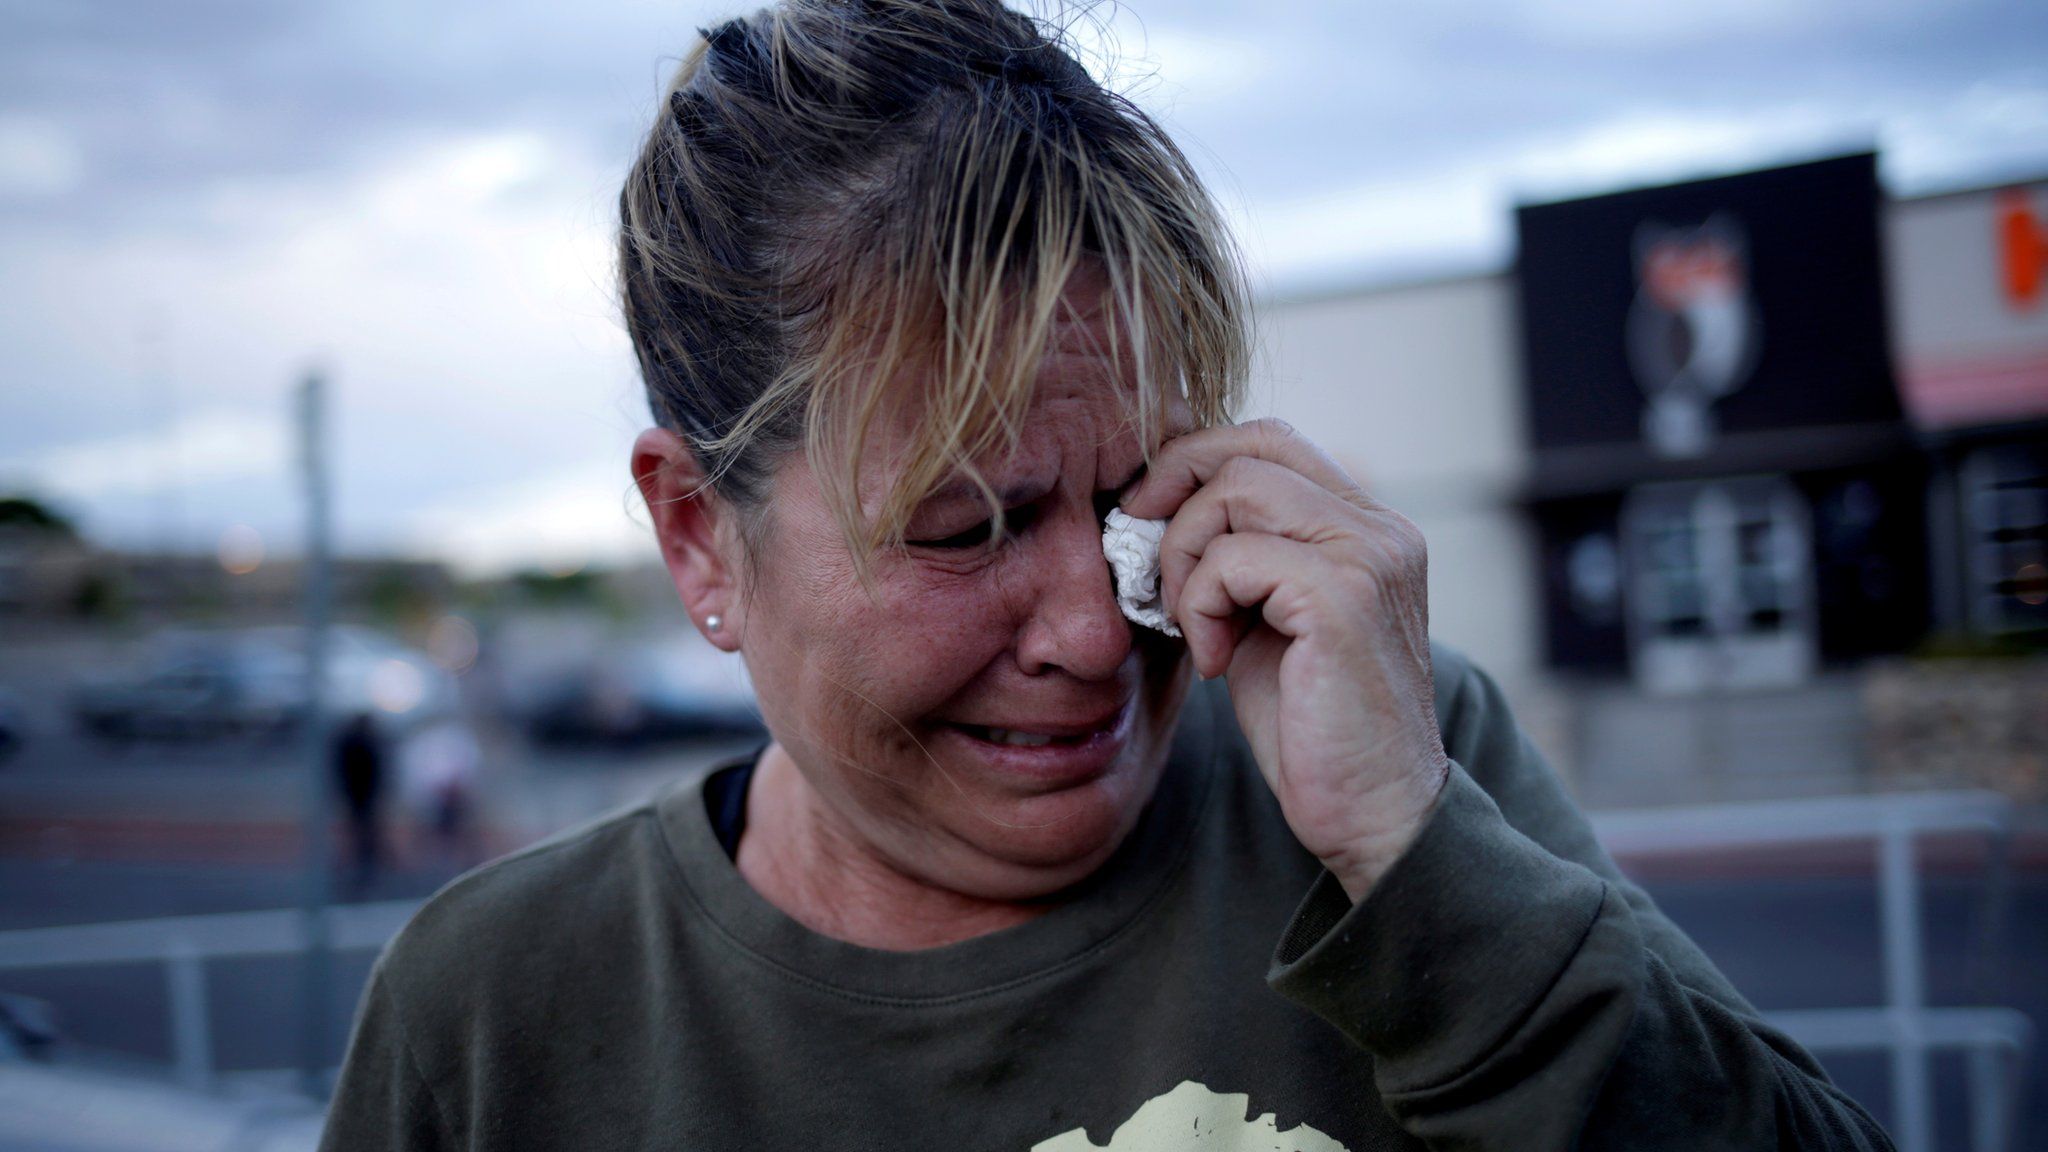 A woman reacts after a mass shooting at a Walmart in El Paso